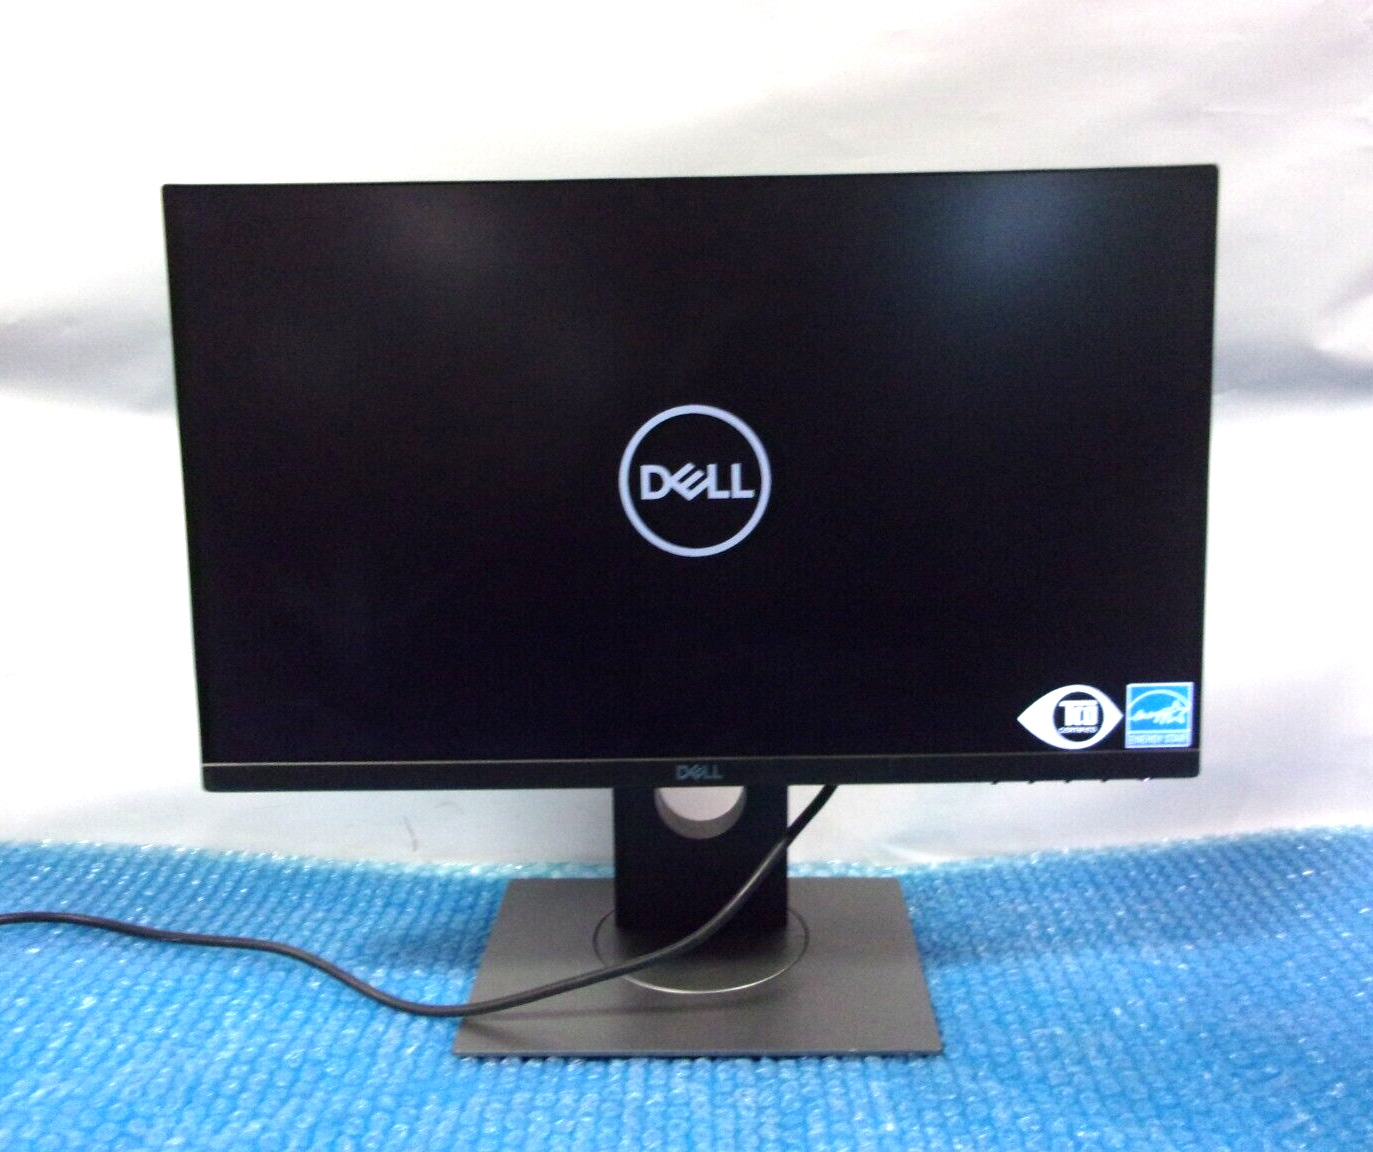 Dell P2219H 21.5in Full HD 1920 X 1080 LED LCD IPS Monitor W/HDMI, VGA, DC CABLE